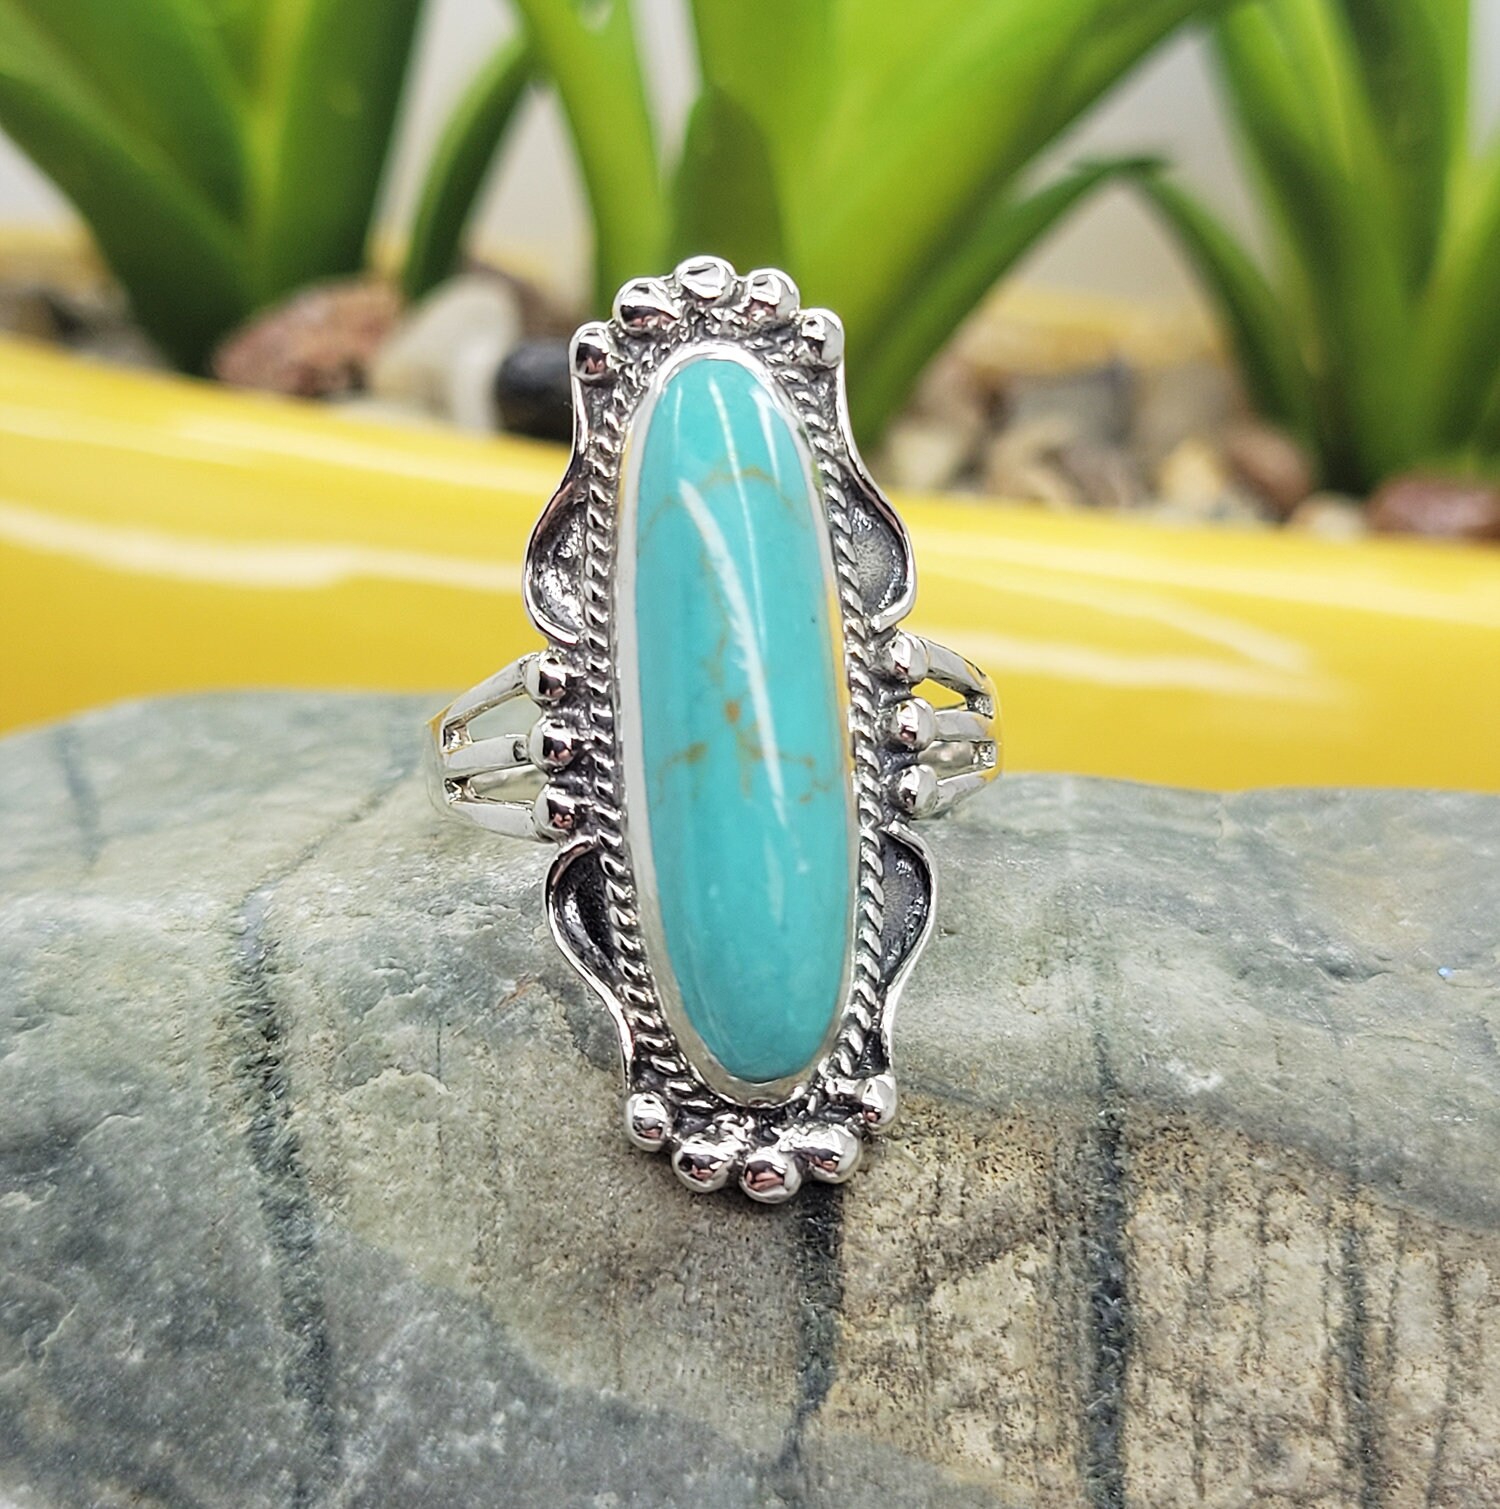 Turquoise Ring, silver ring, Oval stone artisan Ring | Turquoise jewelry  rings, Turquoise ring silver, Turquoise jewelry